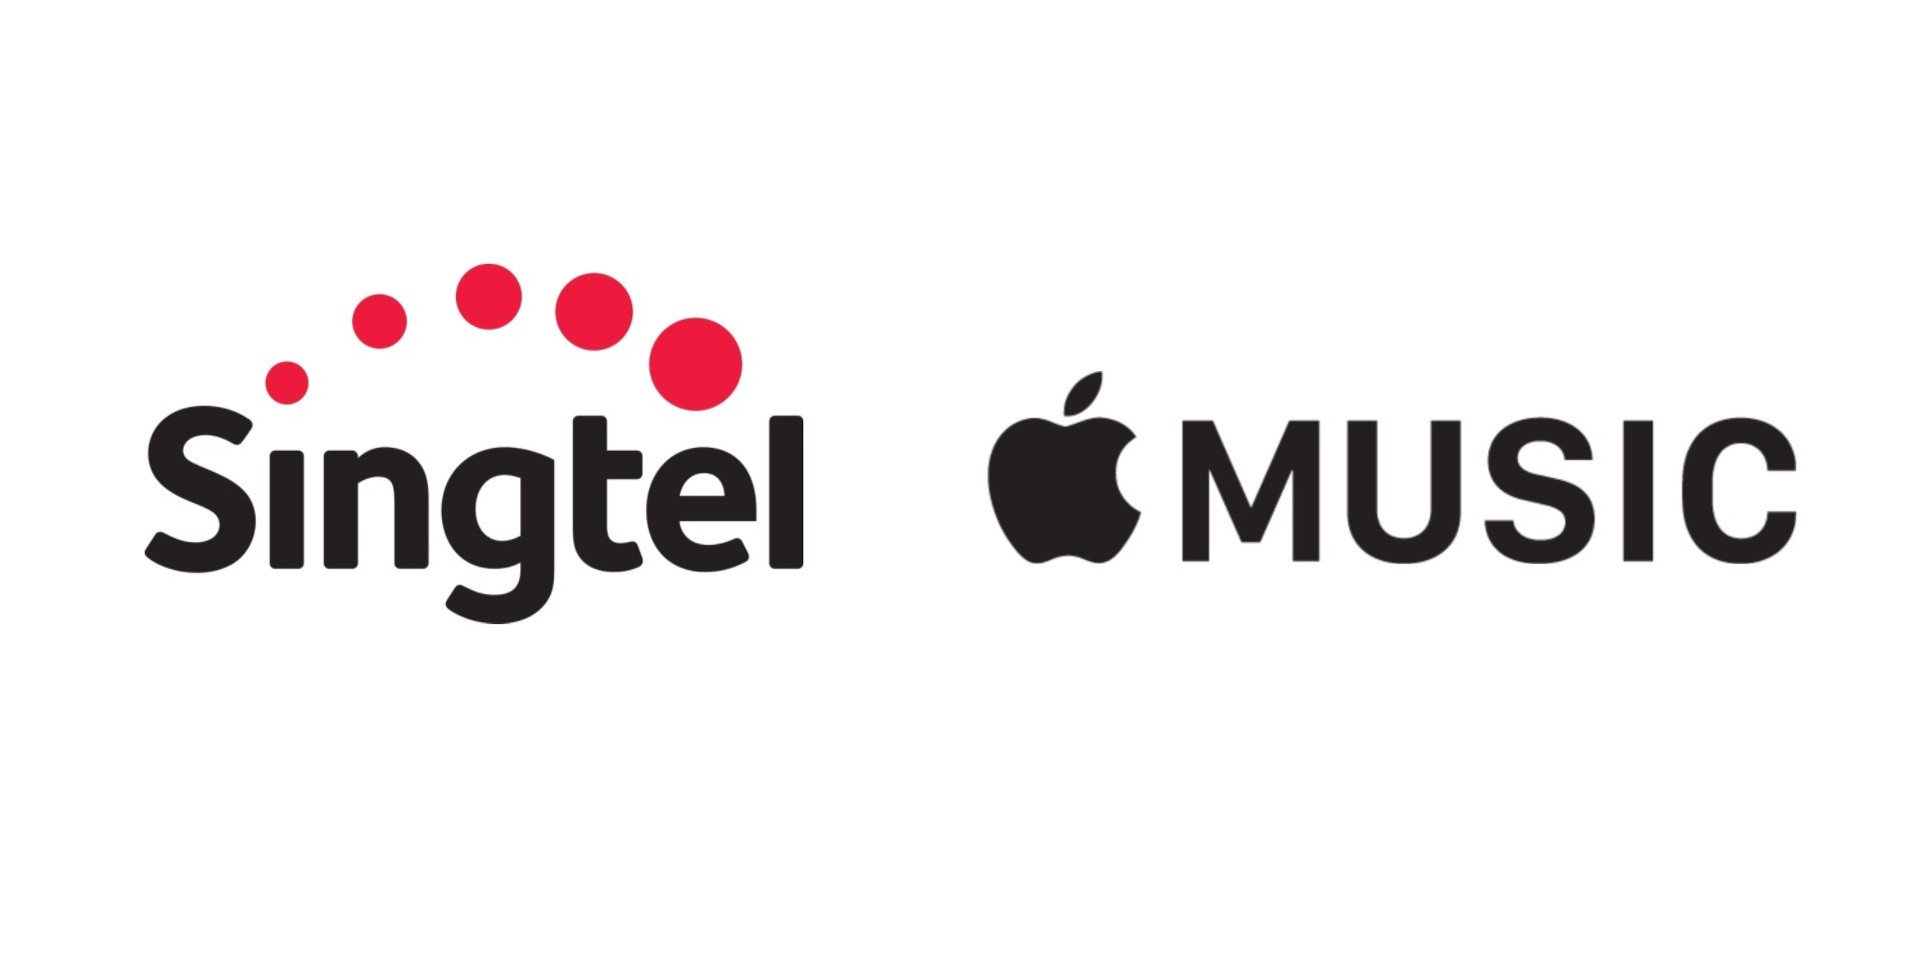 Are you a Singtel user? You can now stream Apple Music data-free for $9.98 a month